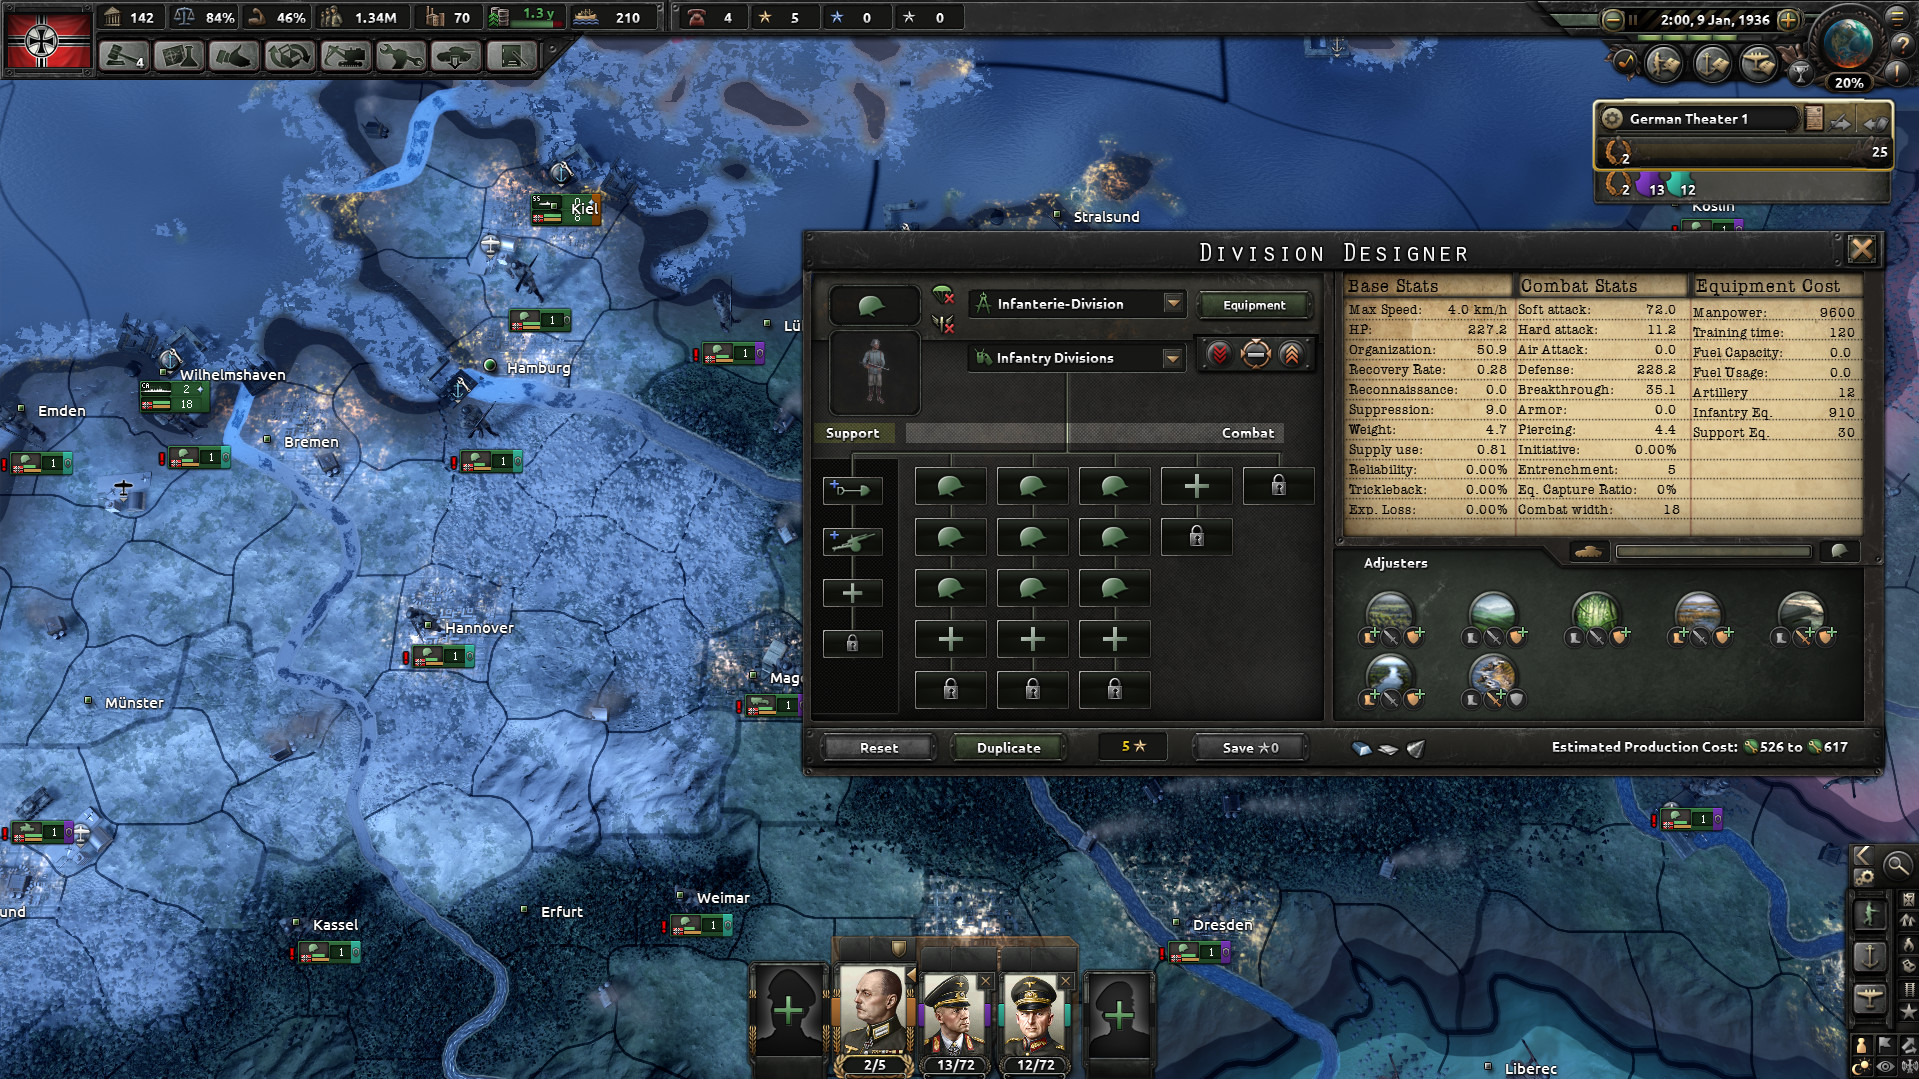 Hearts Of Iron IV Steam Account